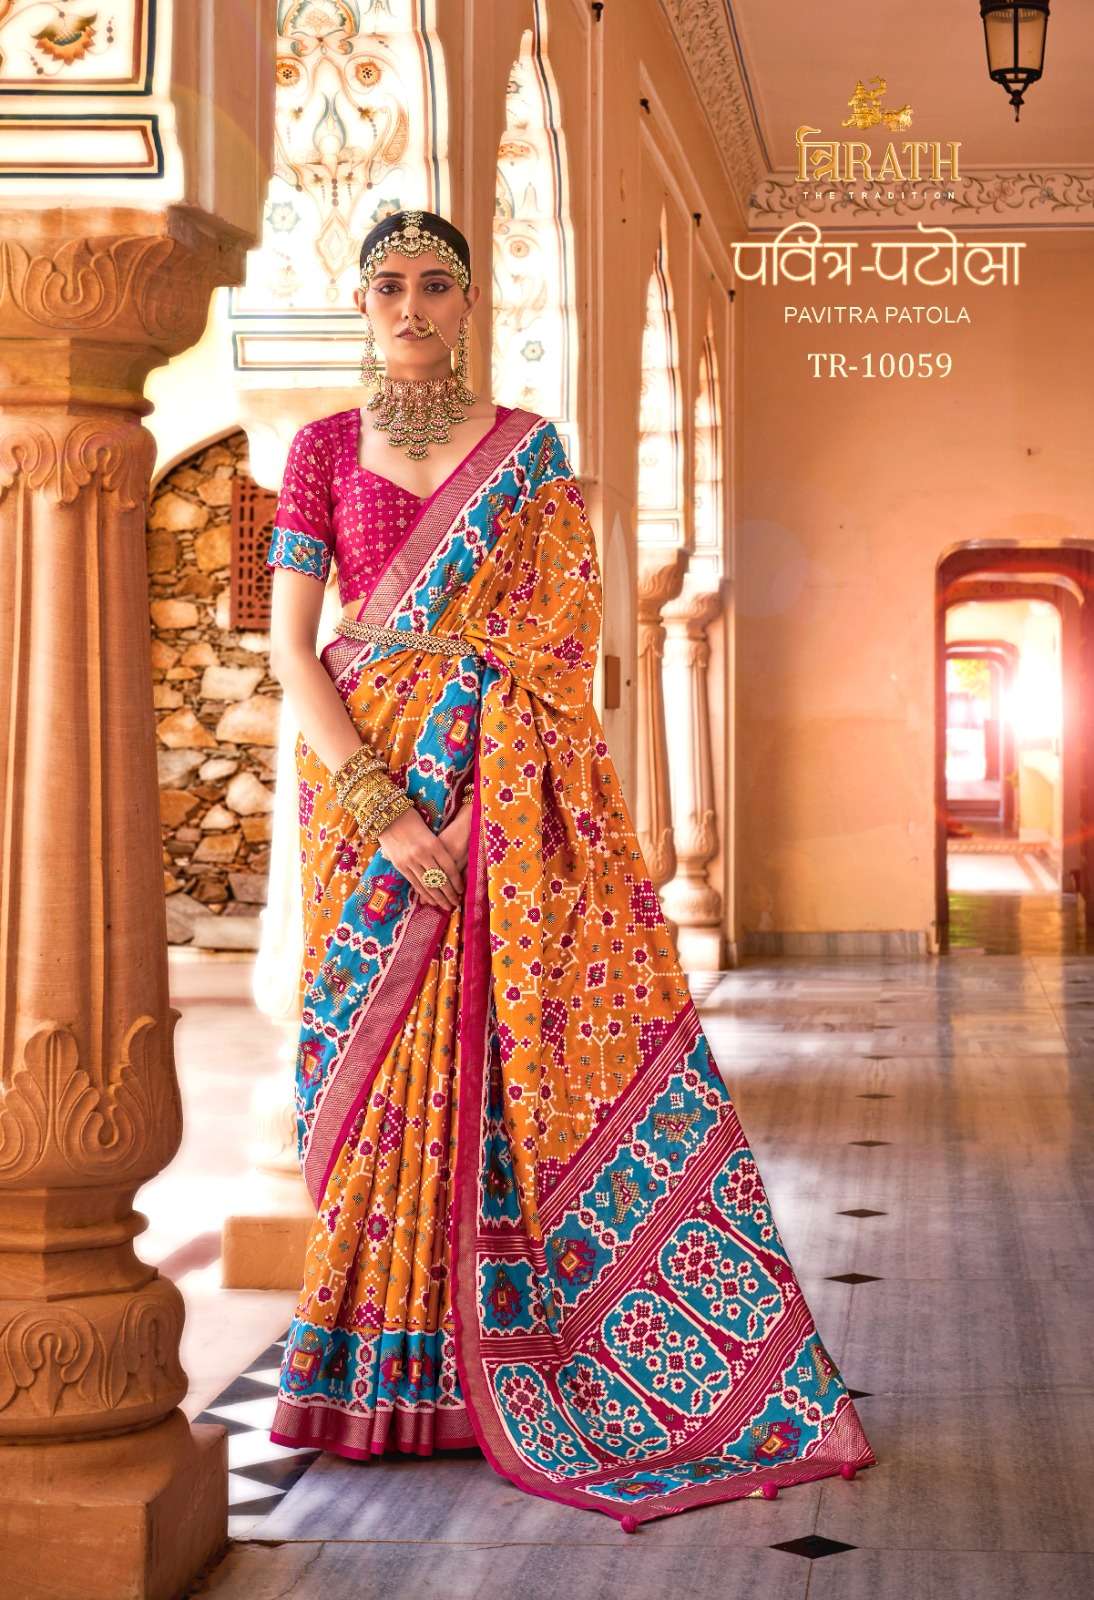 Trirath Pavitra Patola silk with Gujarat Special Traditional...